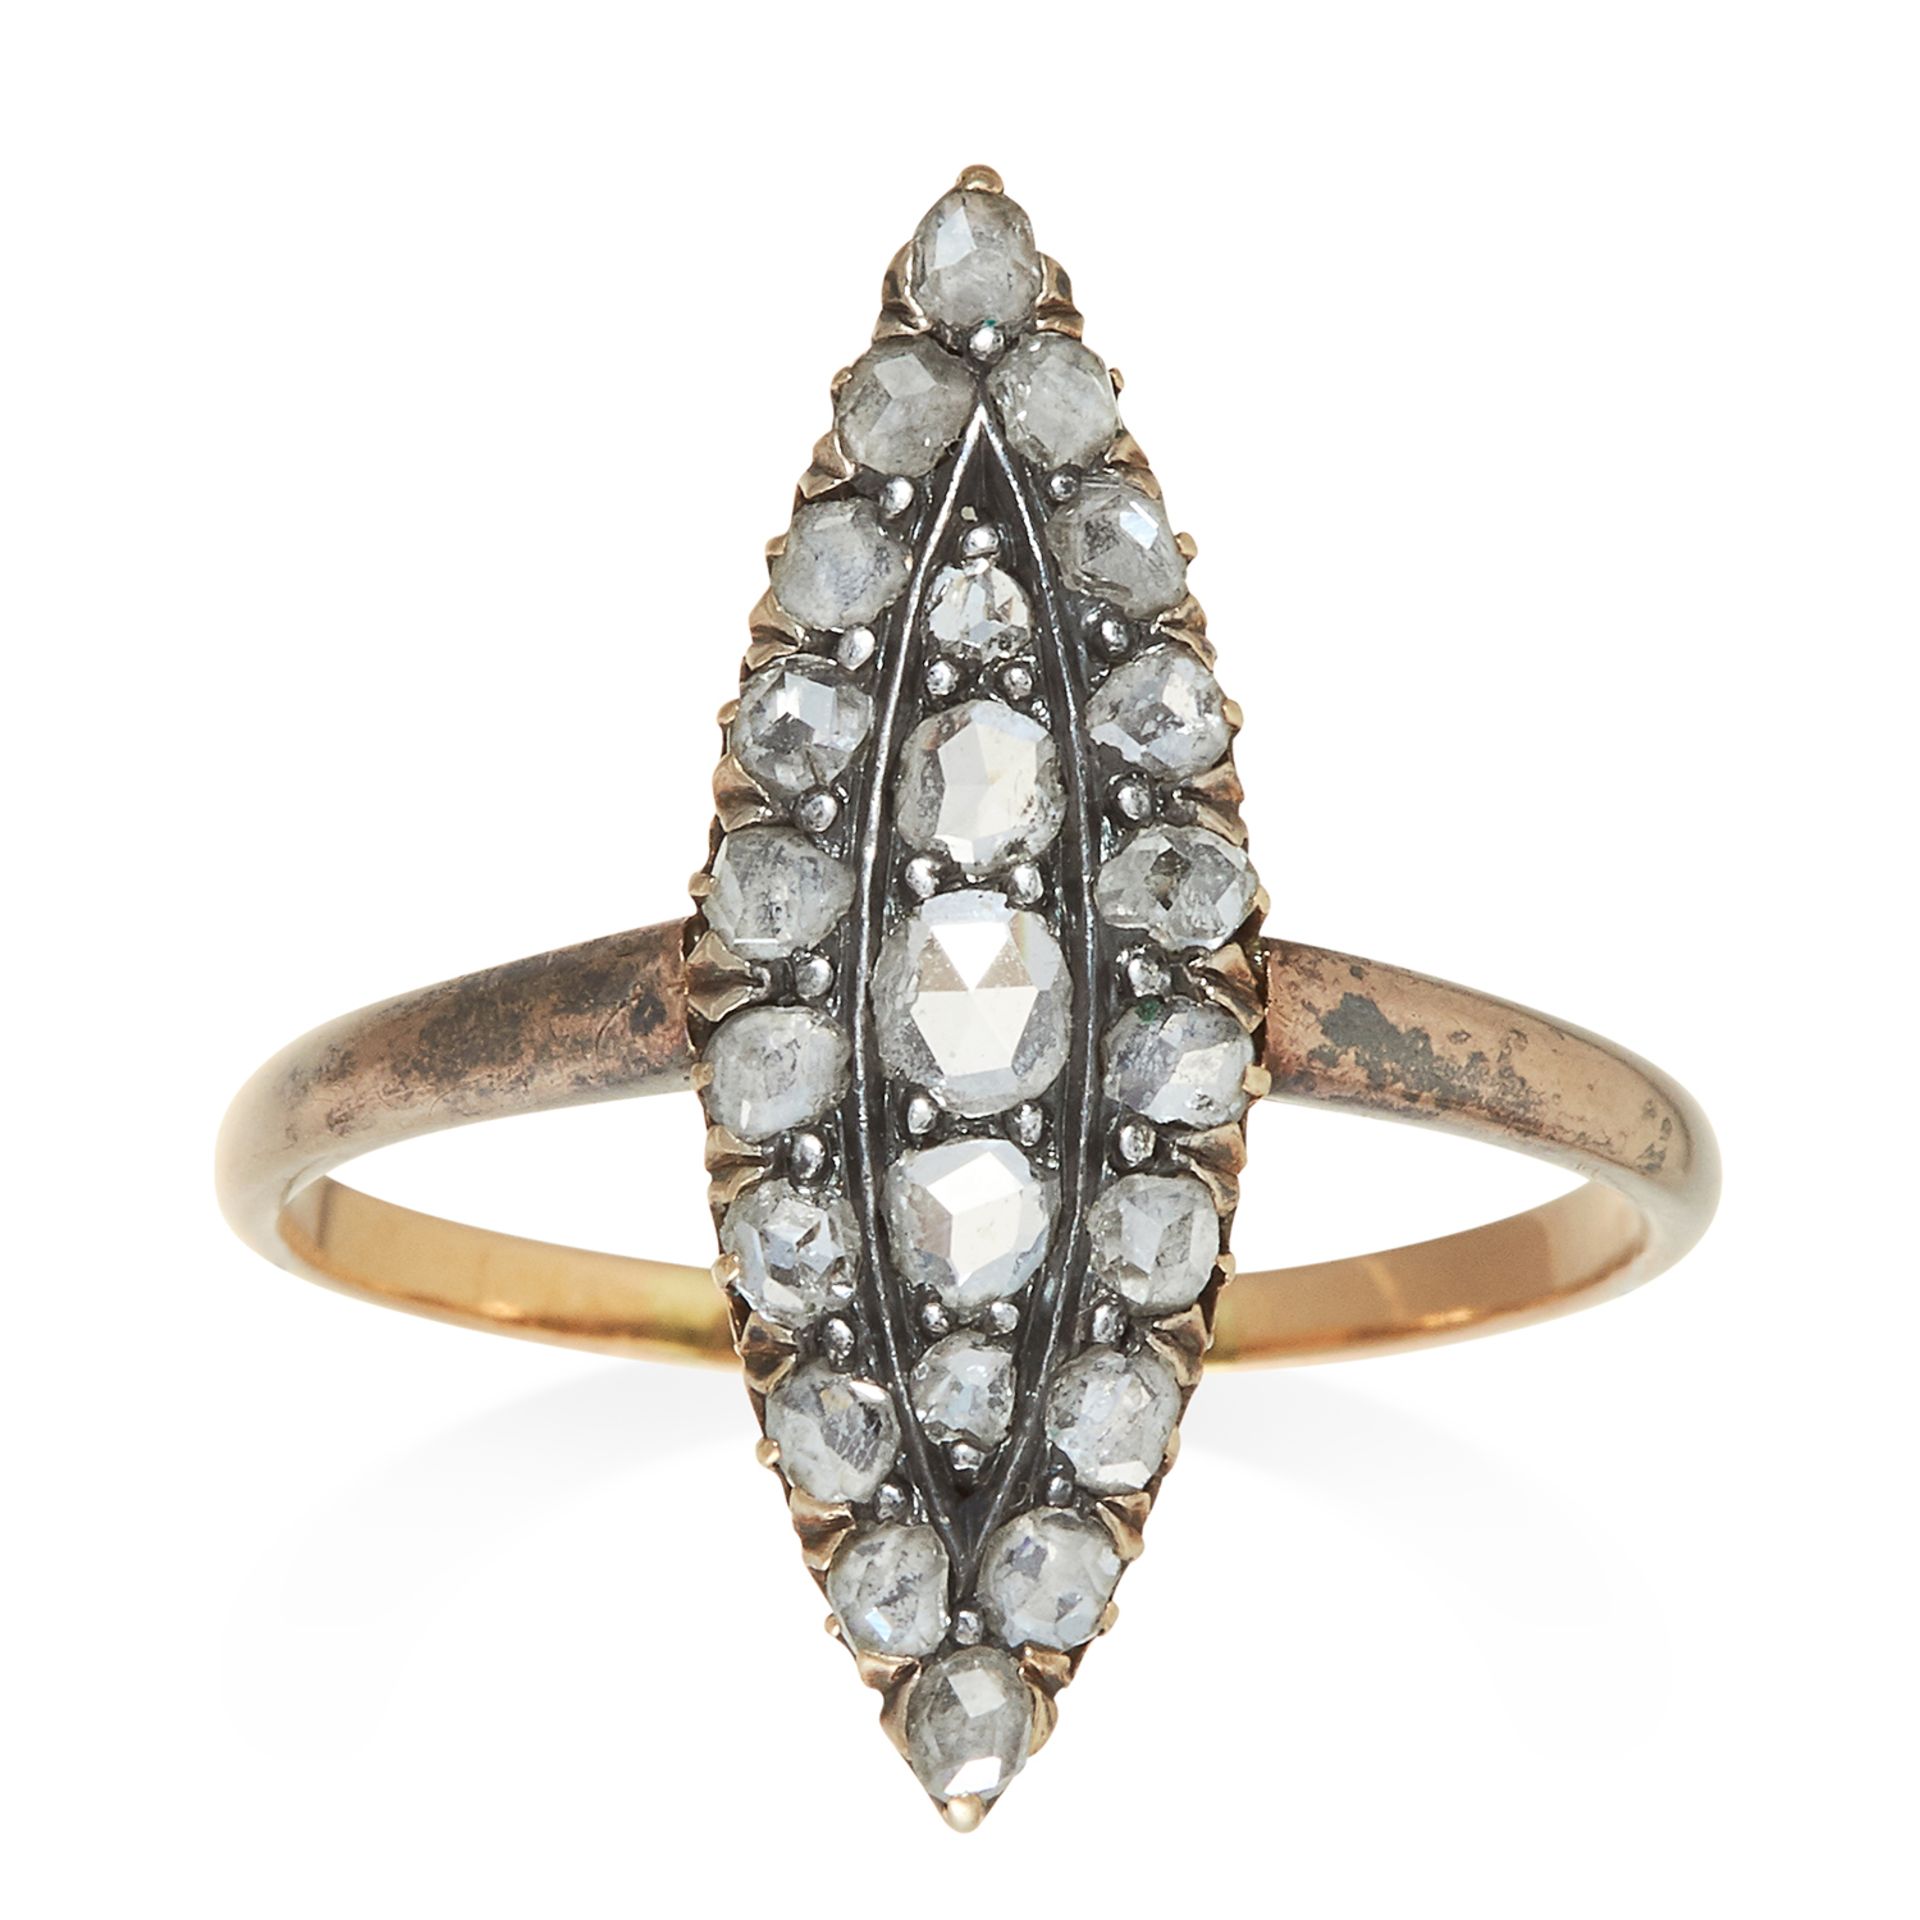 AN ANTIQUE DIAMOND DRESS RING in yellow gold and silver, the marquise face jewelled with rose cut